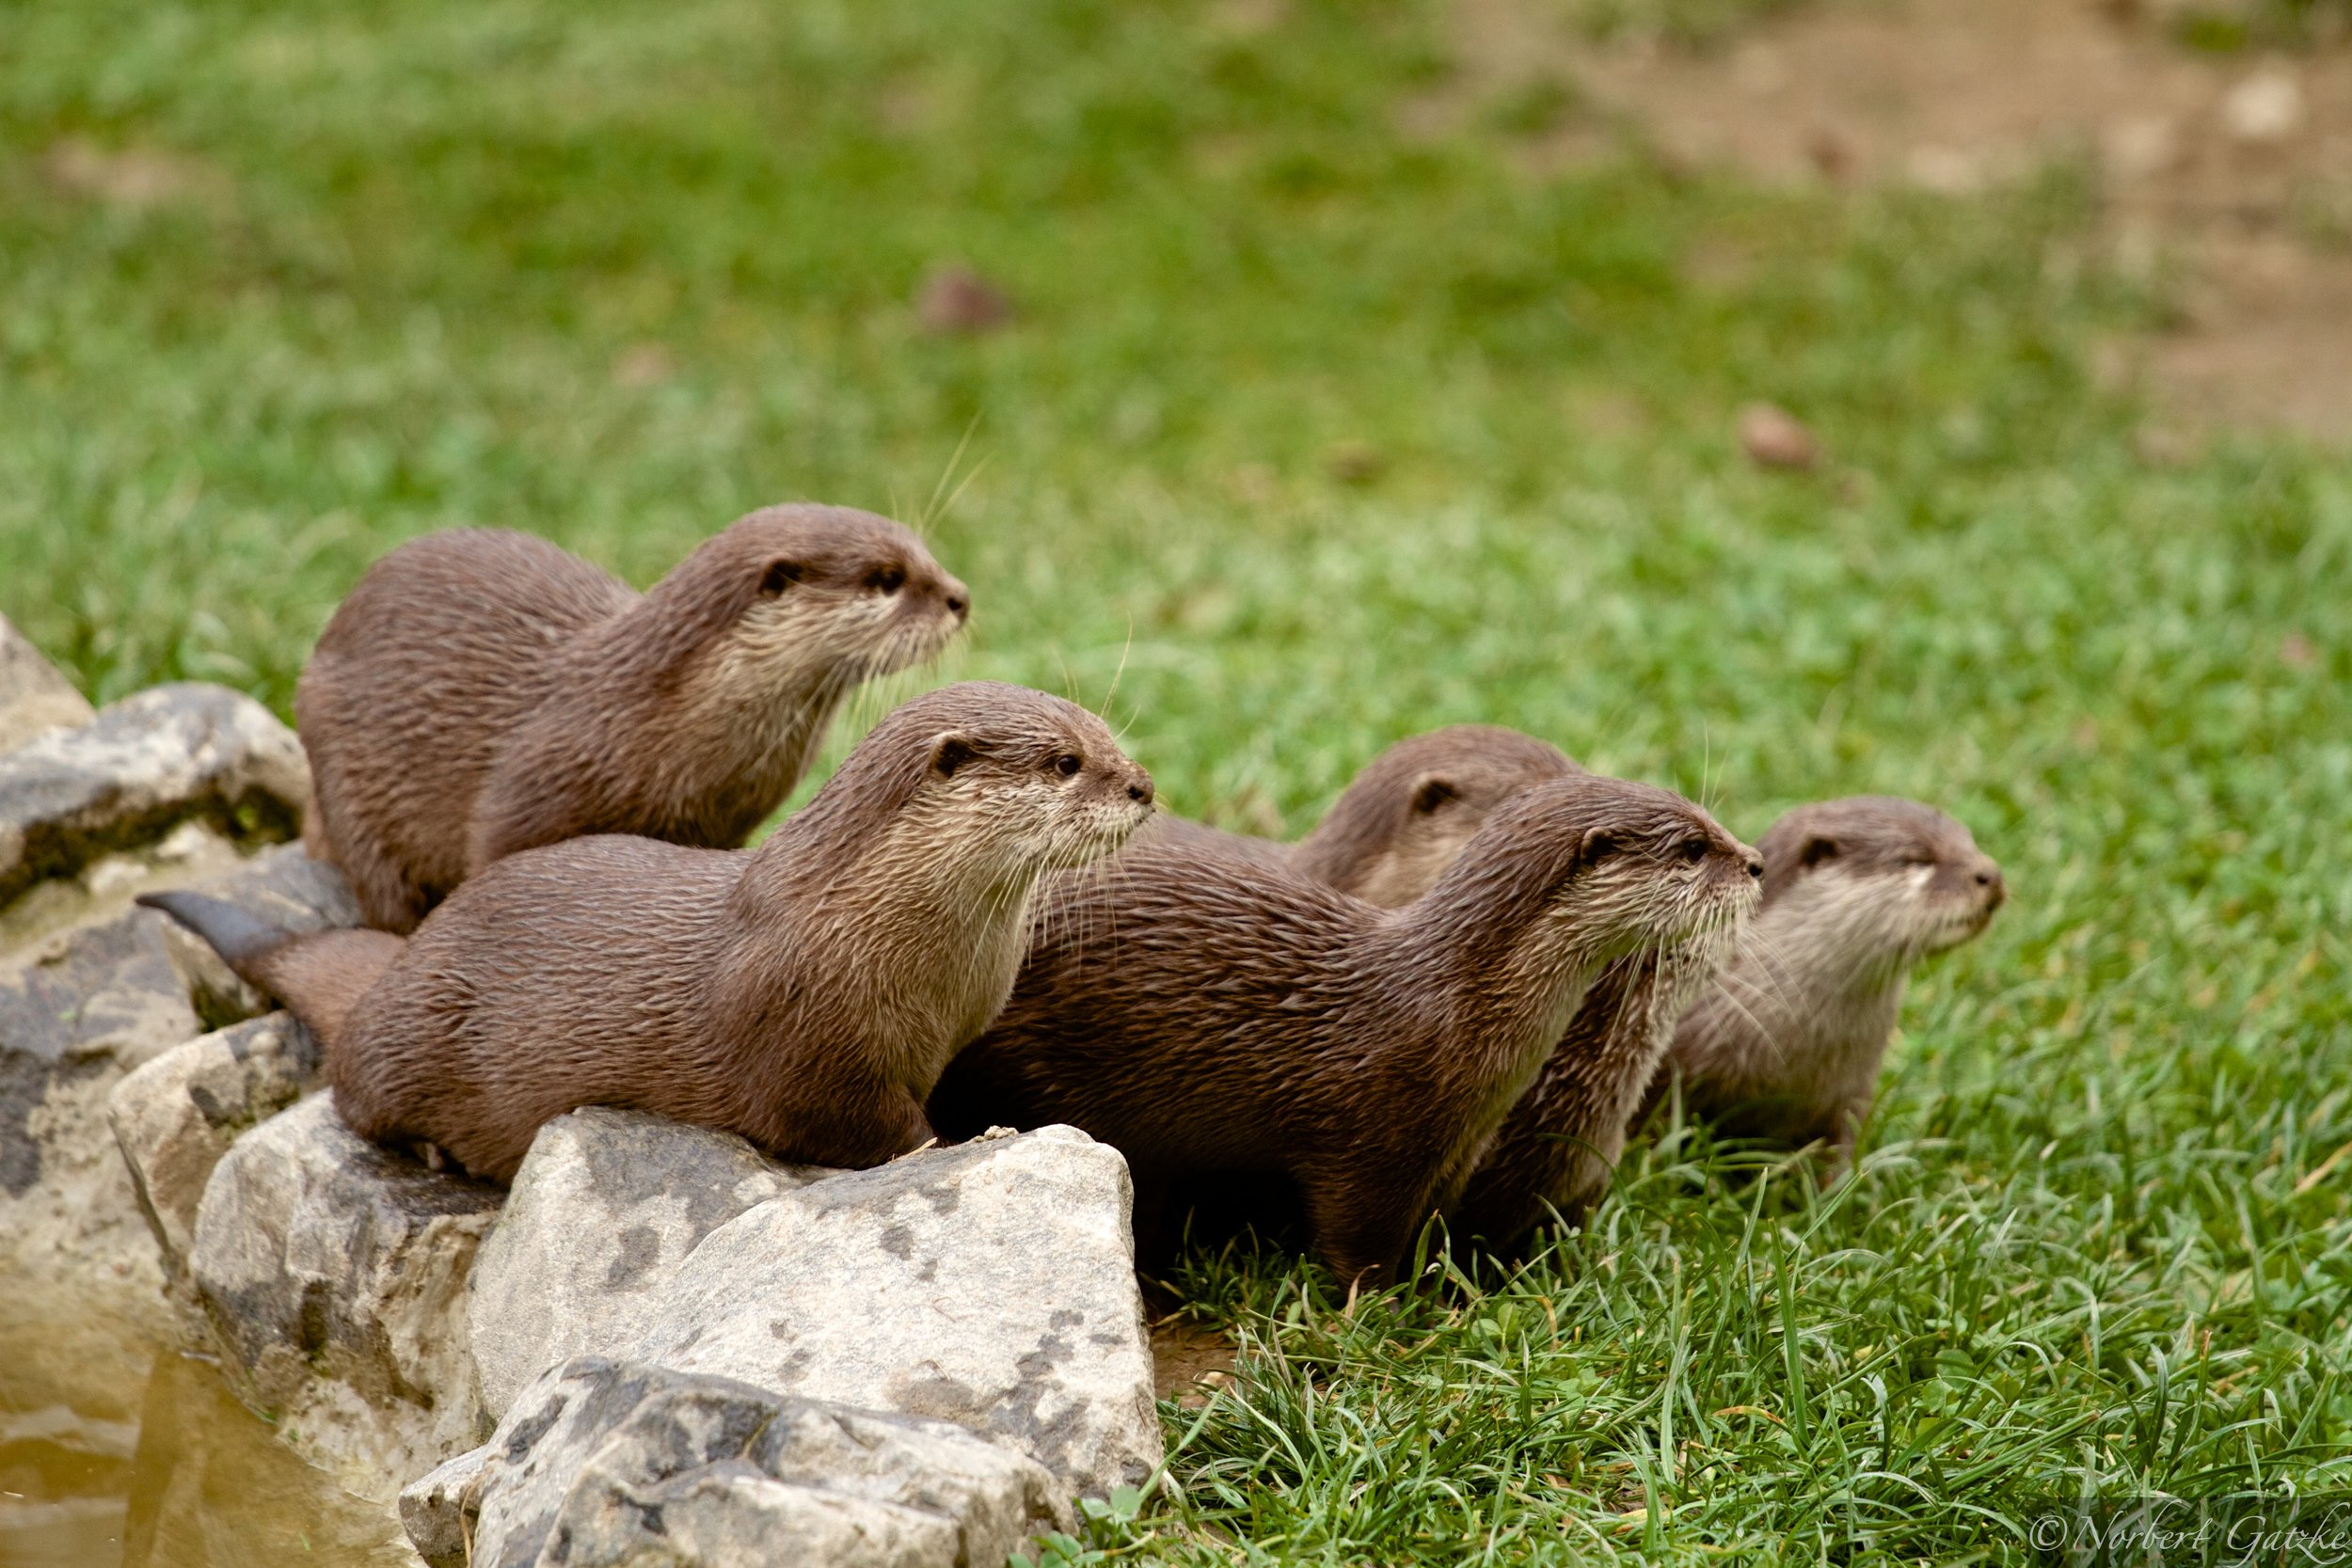 Otters Are Intently Watching Something